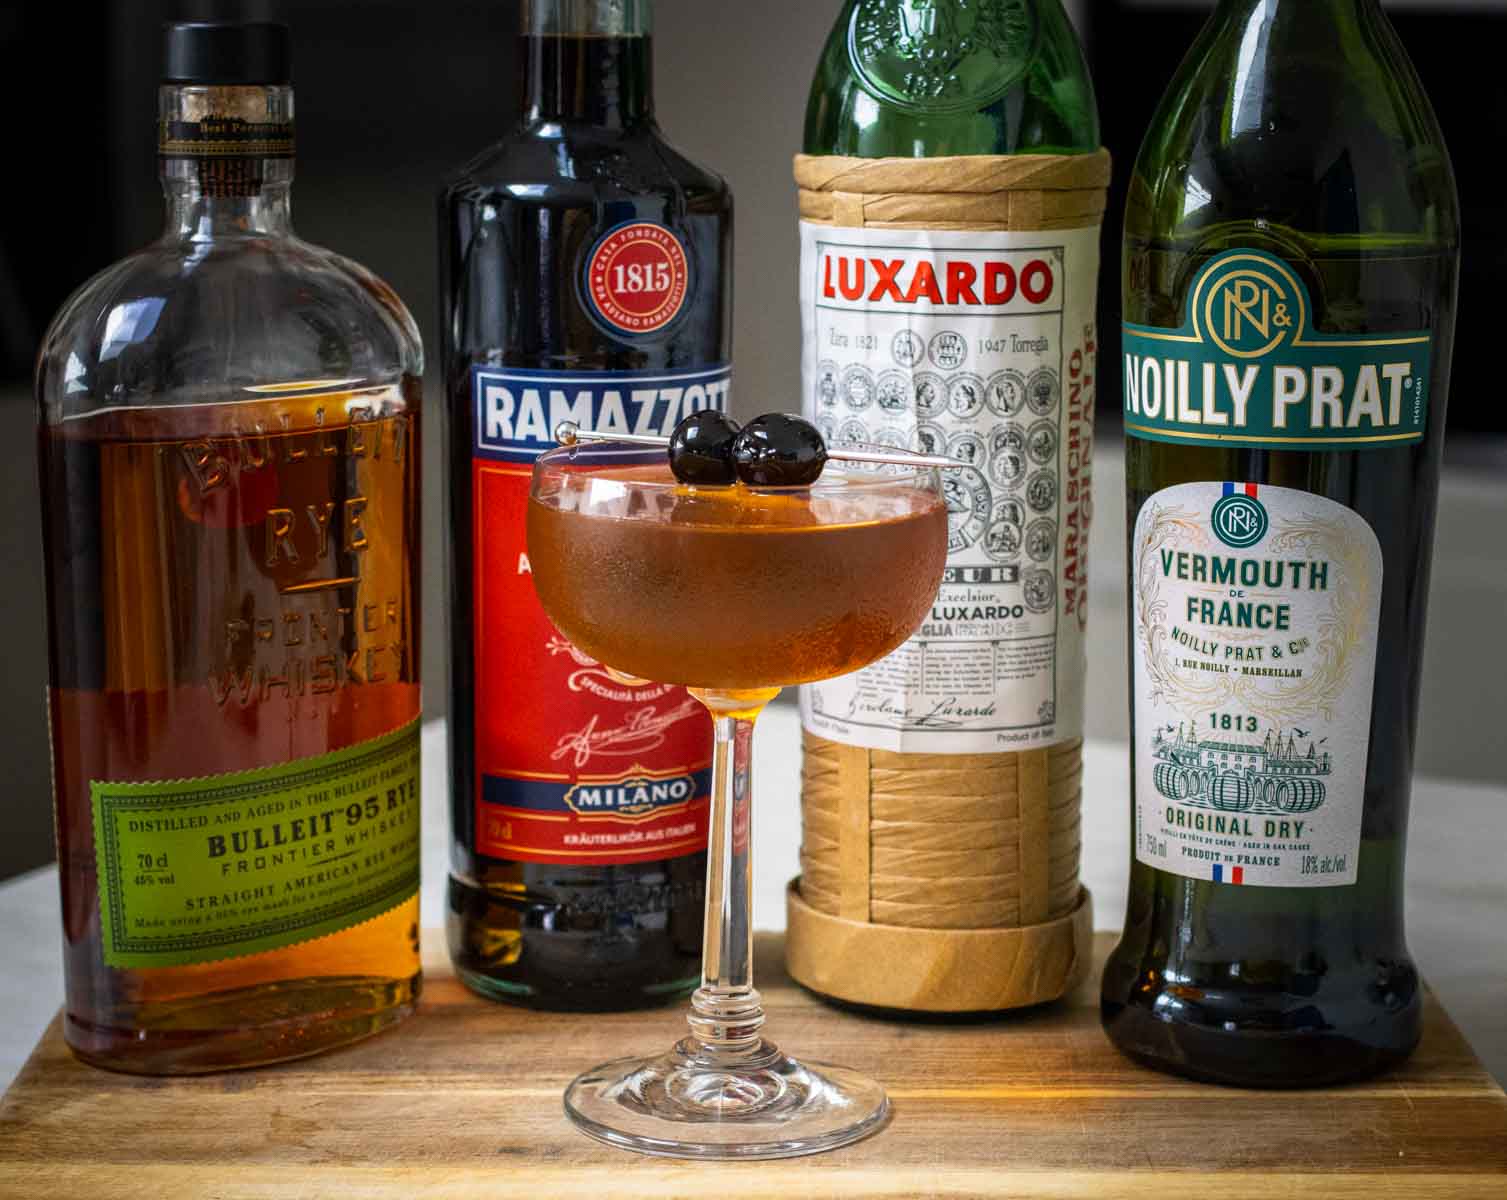 Crafted Brooklyn Cocktail with Bottles